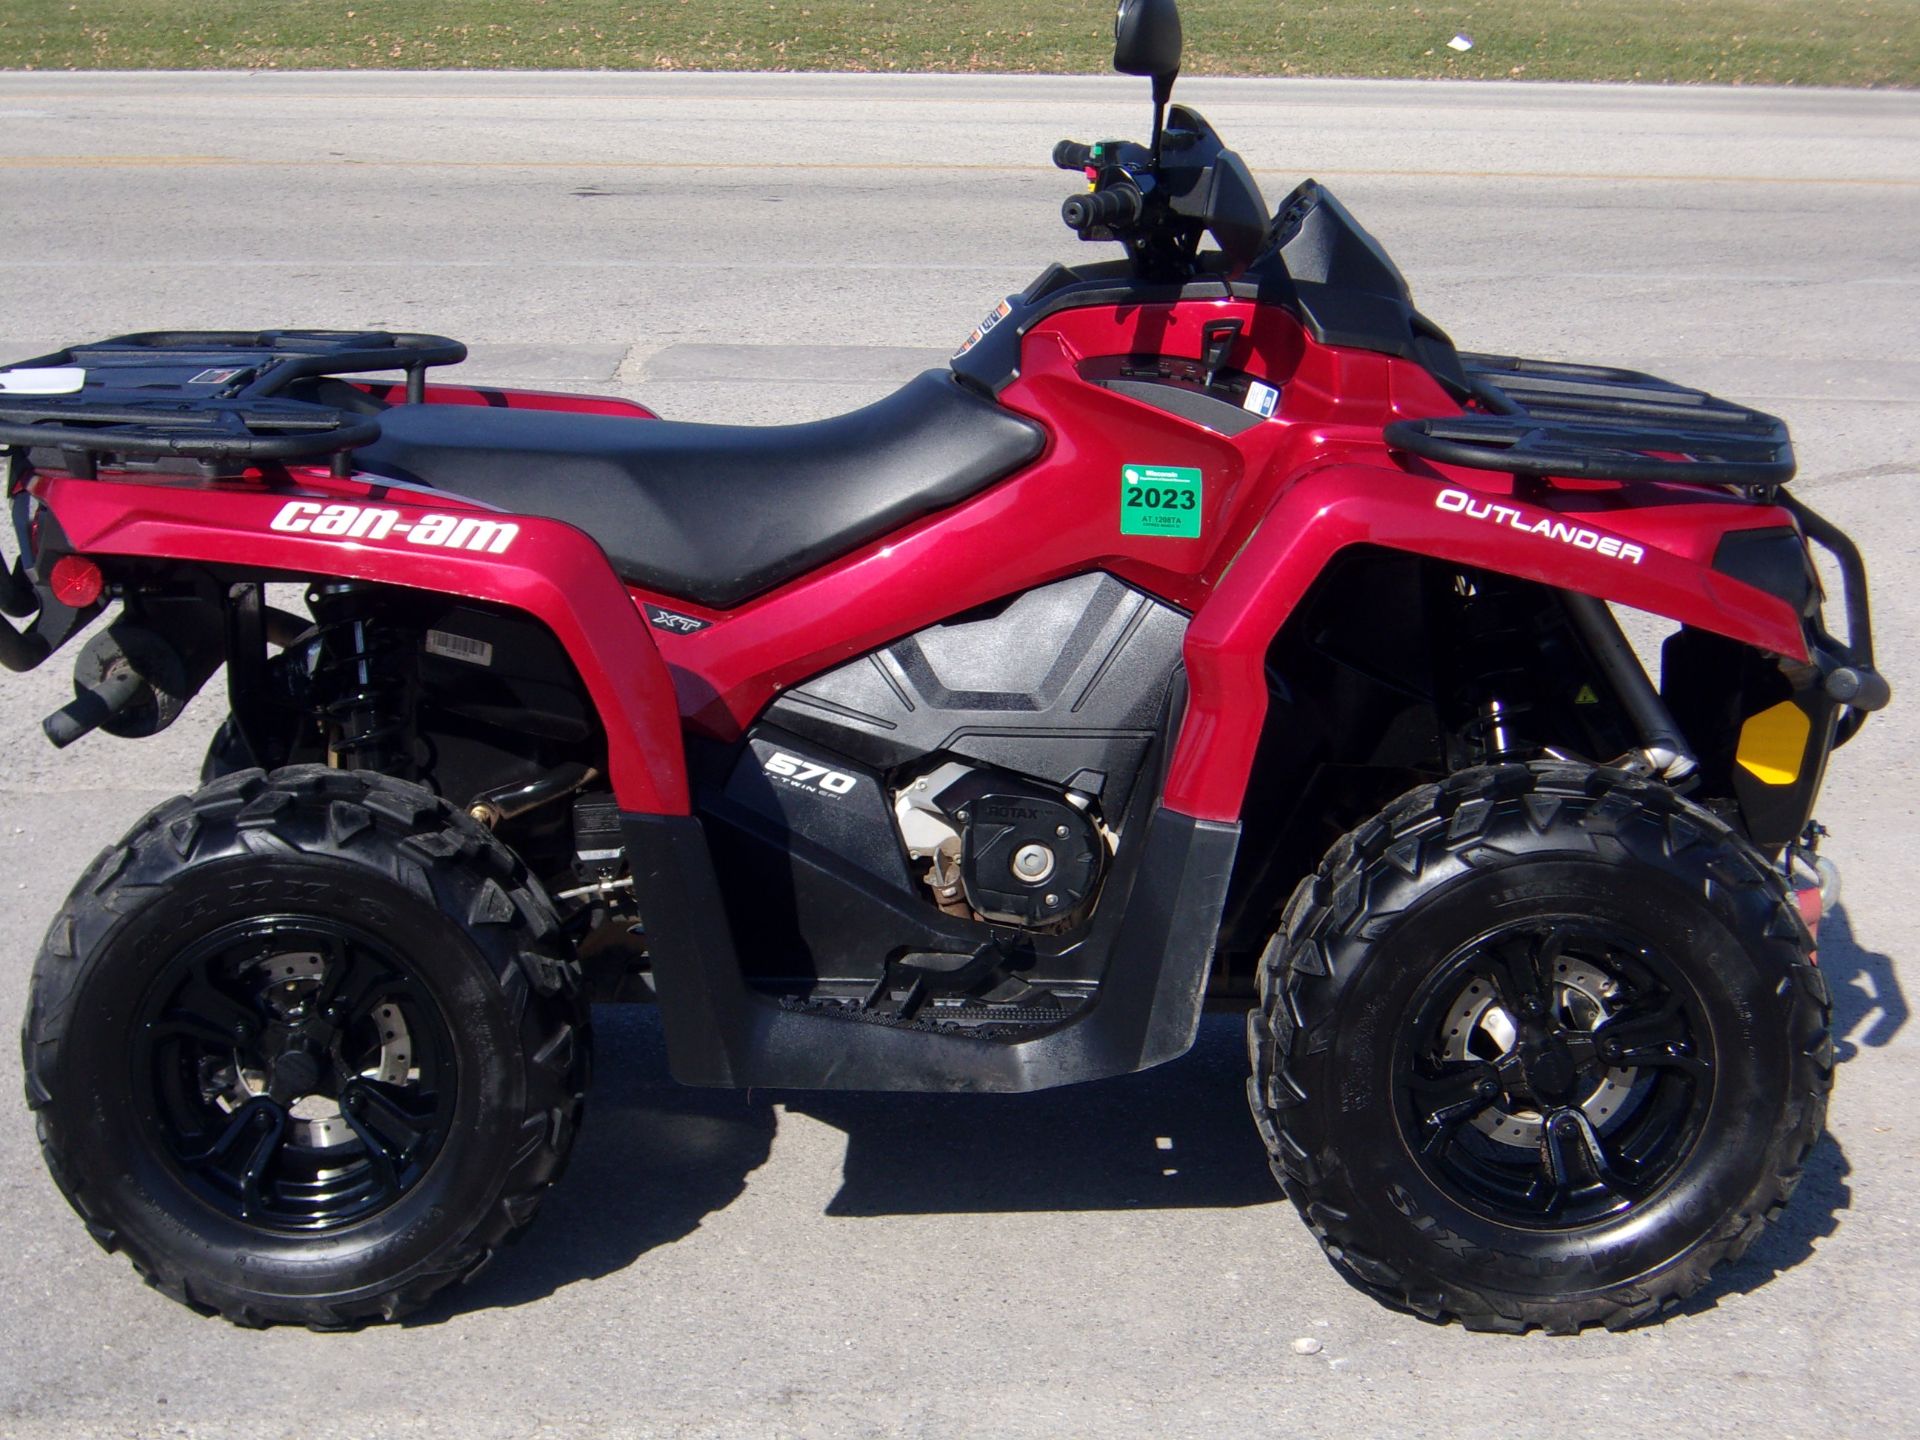 2019 Can-Am Outlander XT 570 in Mukwonago, Wisconsin - Photo 1